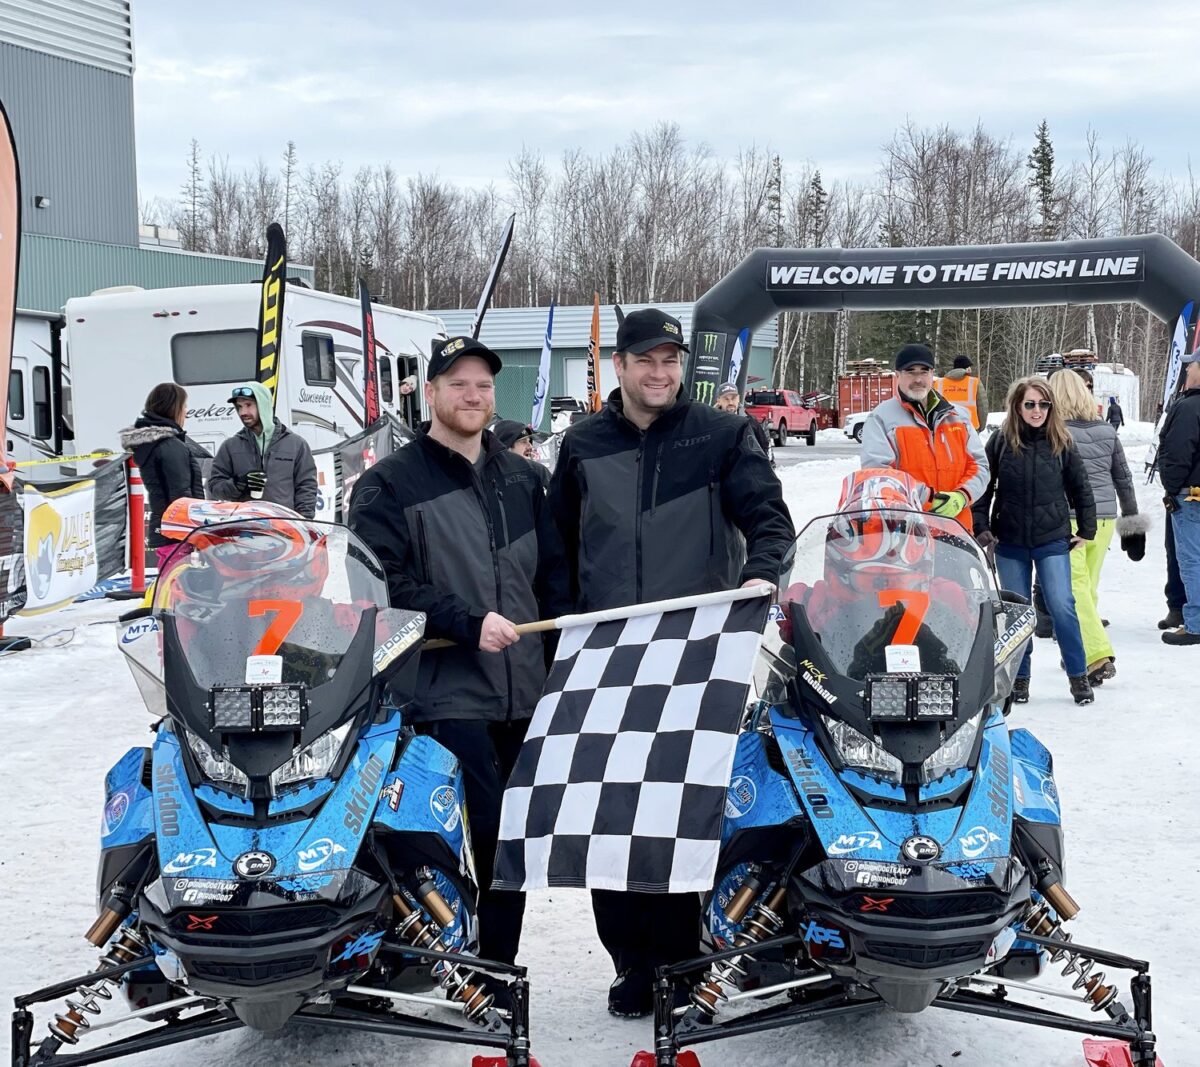 Two men standing next to the snow machines holding a checkered flag at the finish line